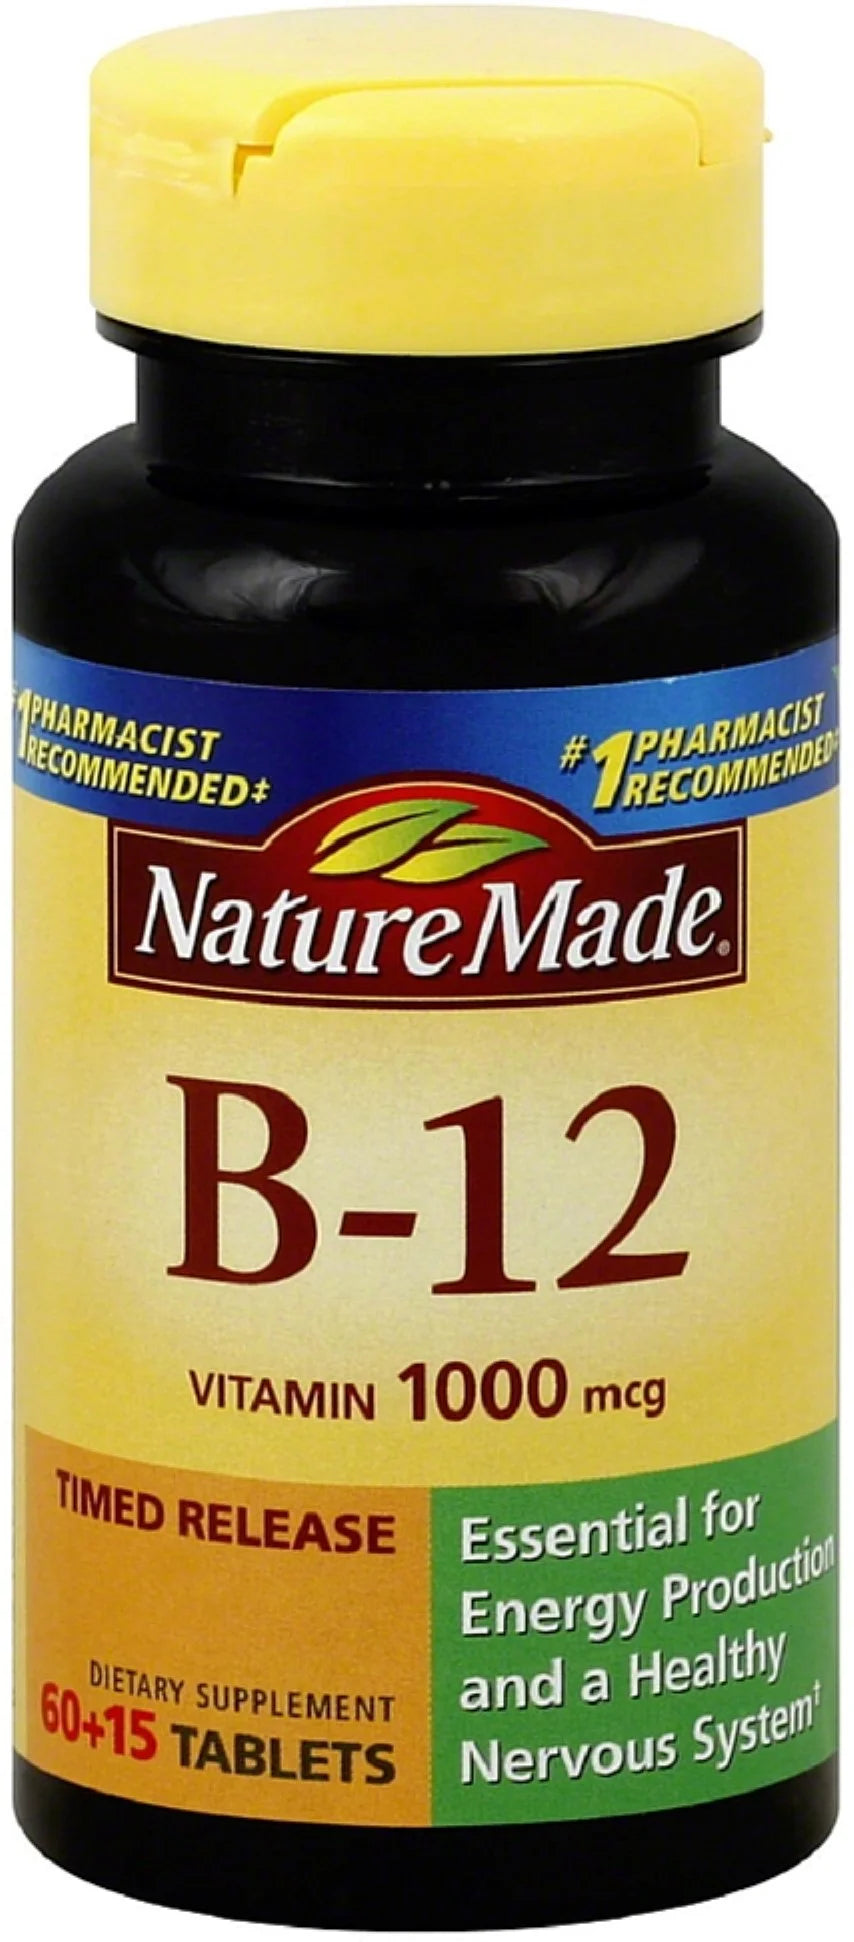 Nature Made Vitamin B-12 Timed Release Tablets, 1000 Mcg 75 Ea (Pack of 4)